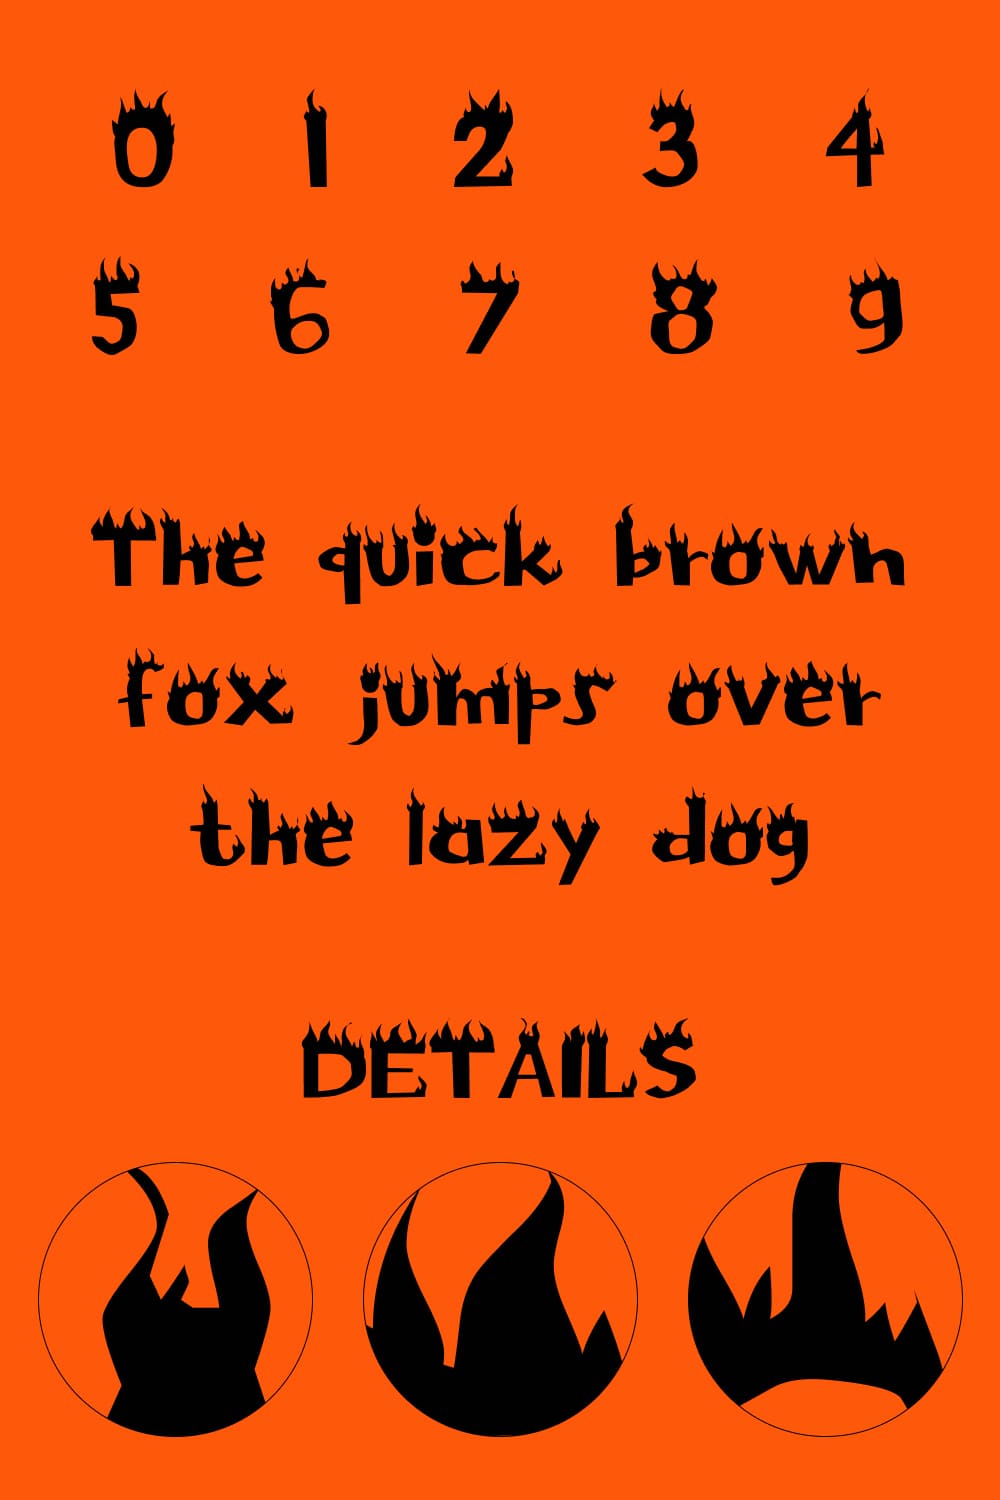 This font if perfect for Halloween.